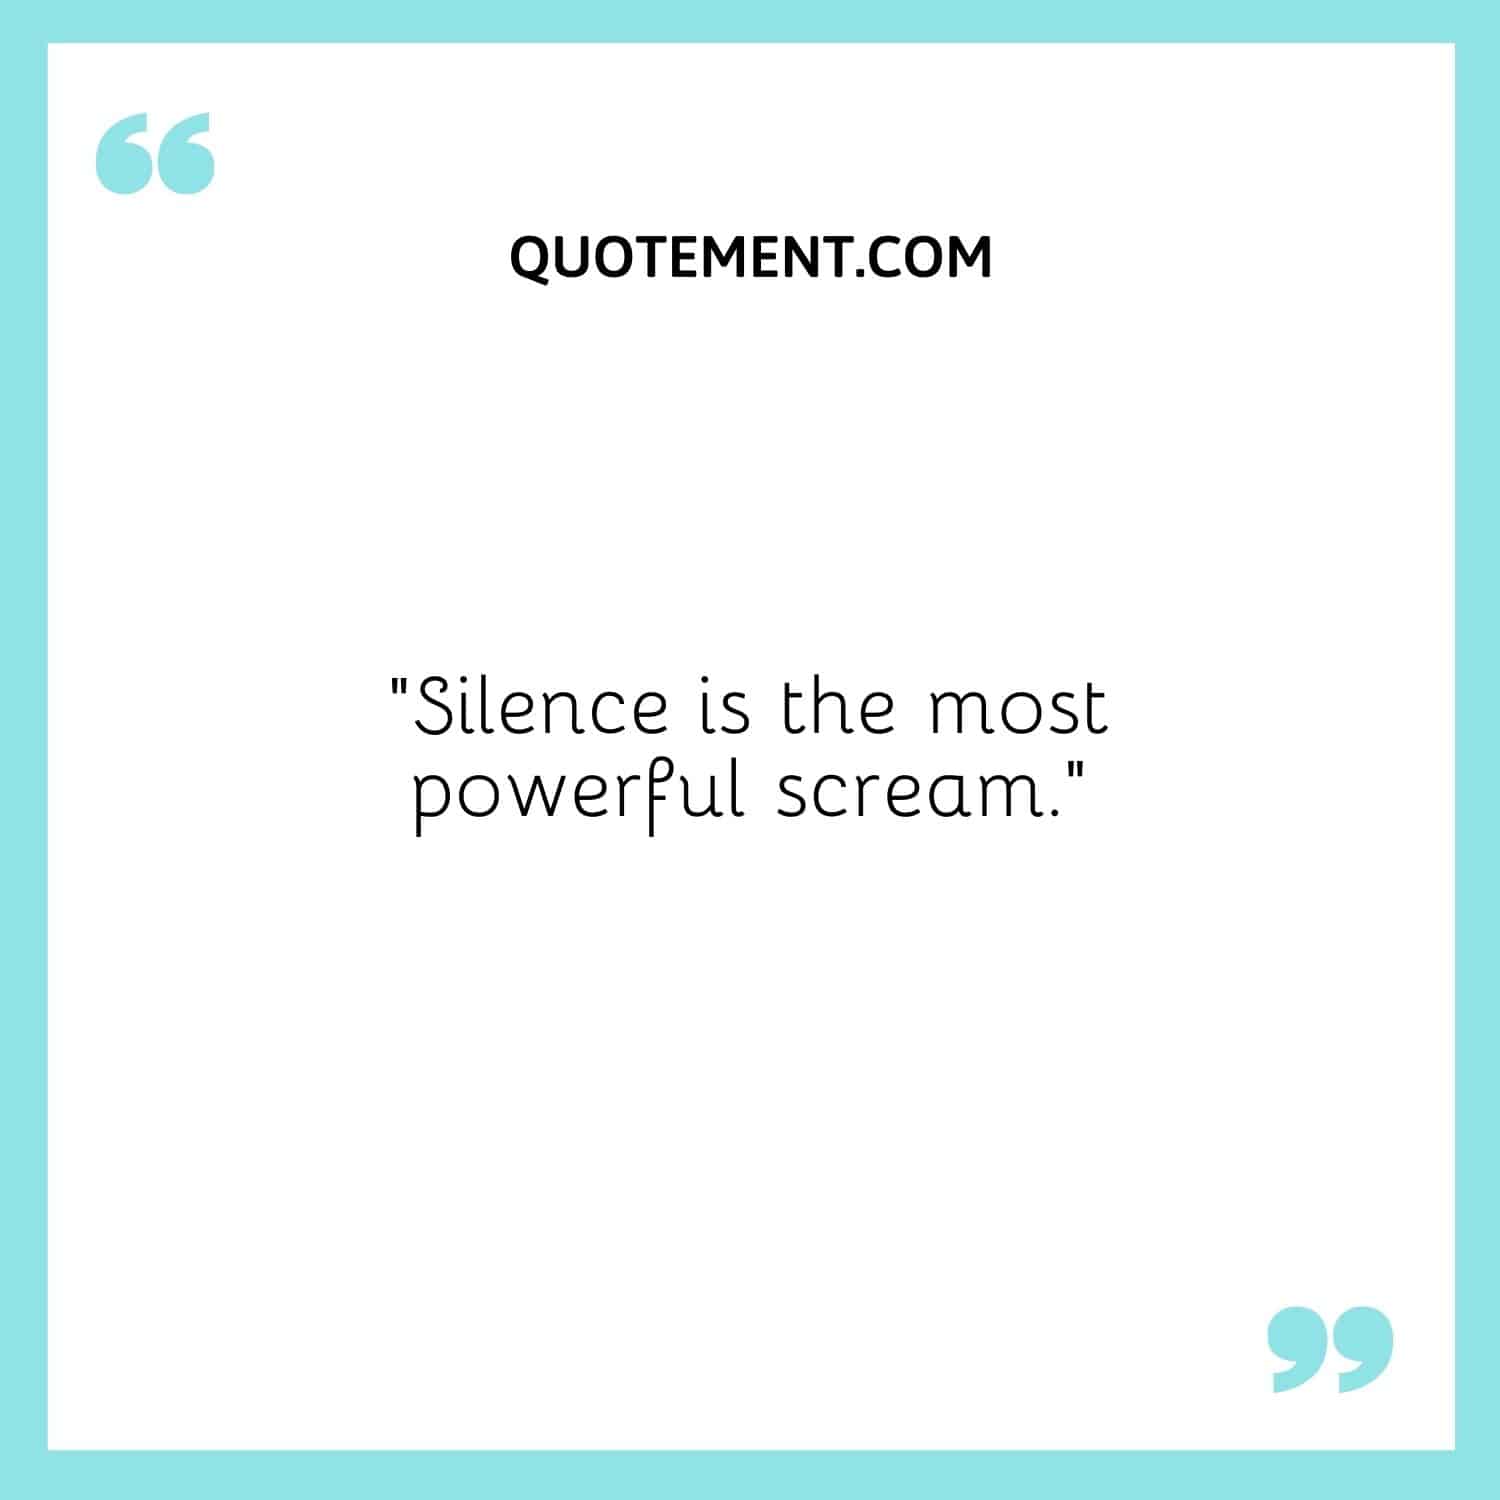 “Silence is the most powerful scream.”